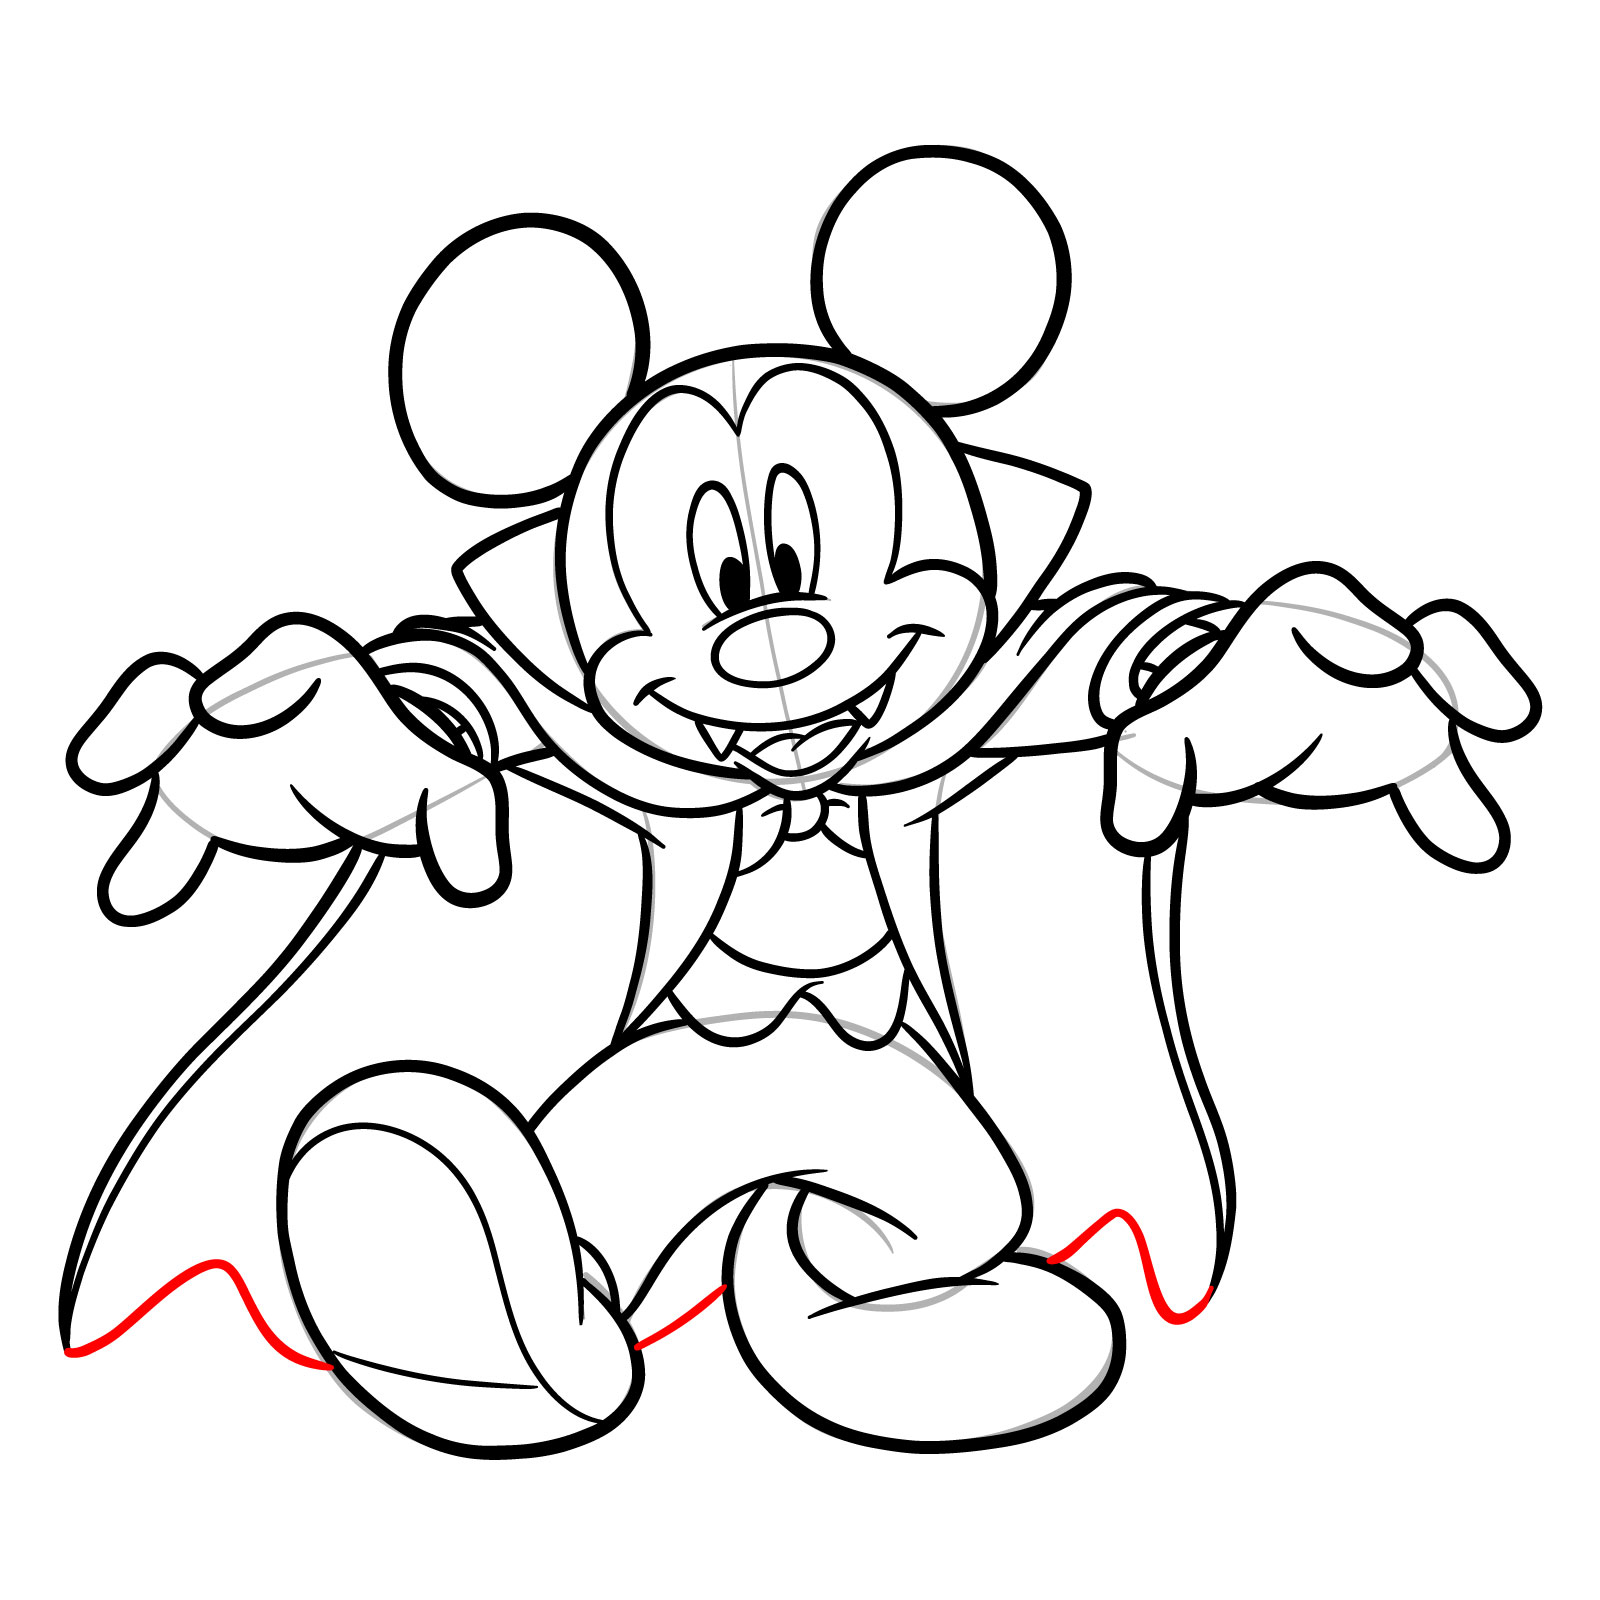 How to draw Dracula Mickey Mouse - step 27